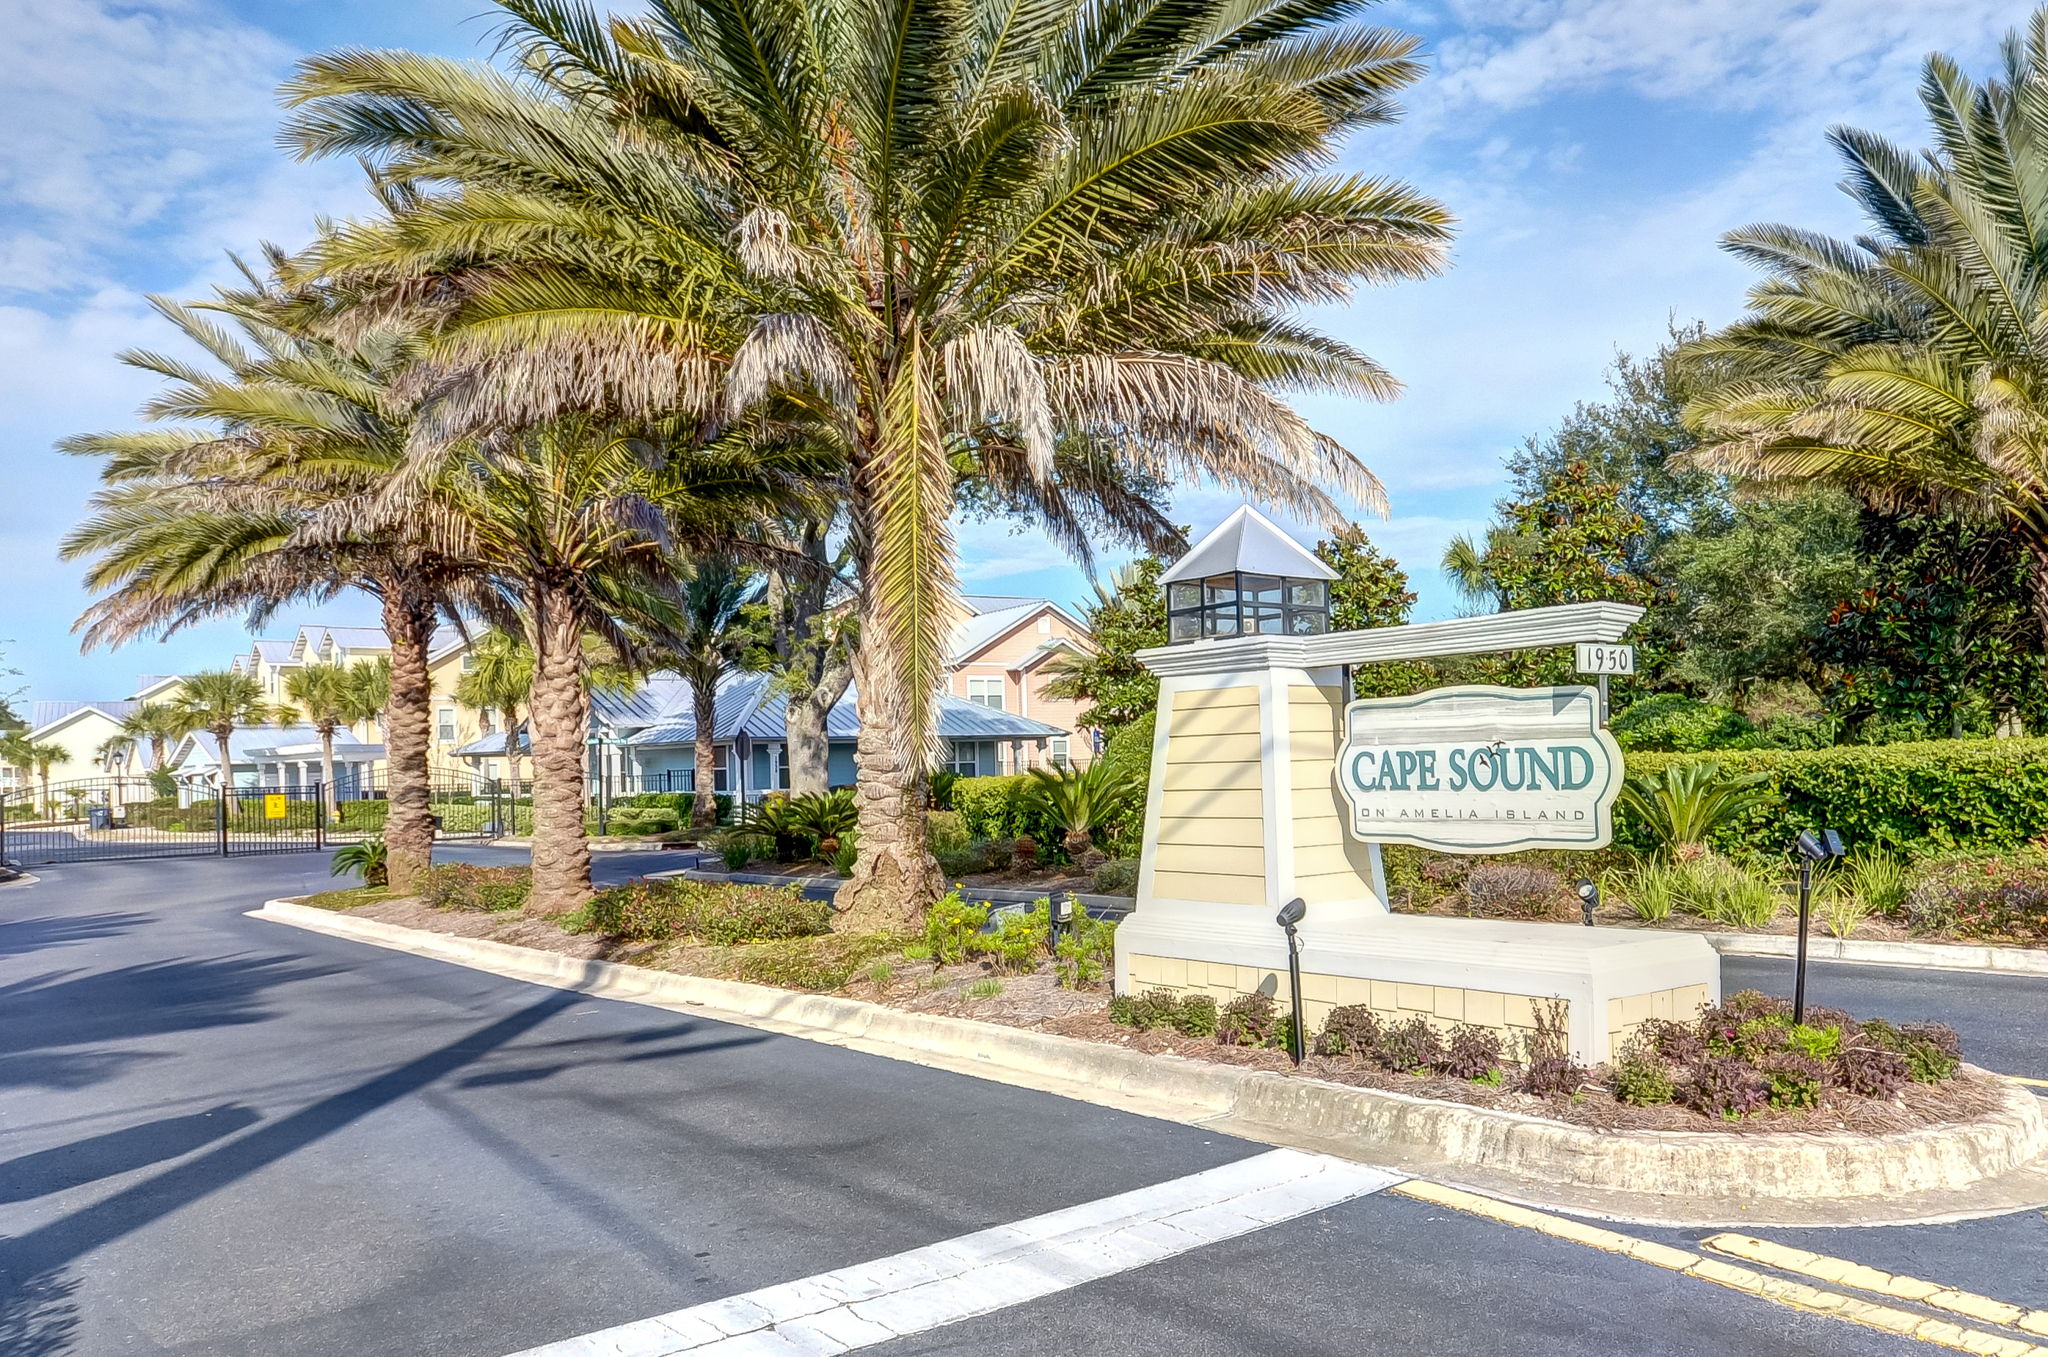 Cape Sound is a gated community with just 72 units.